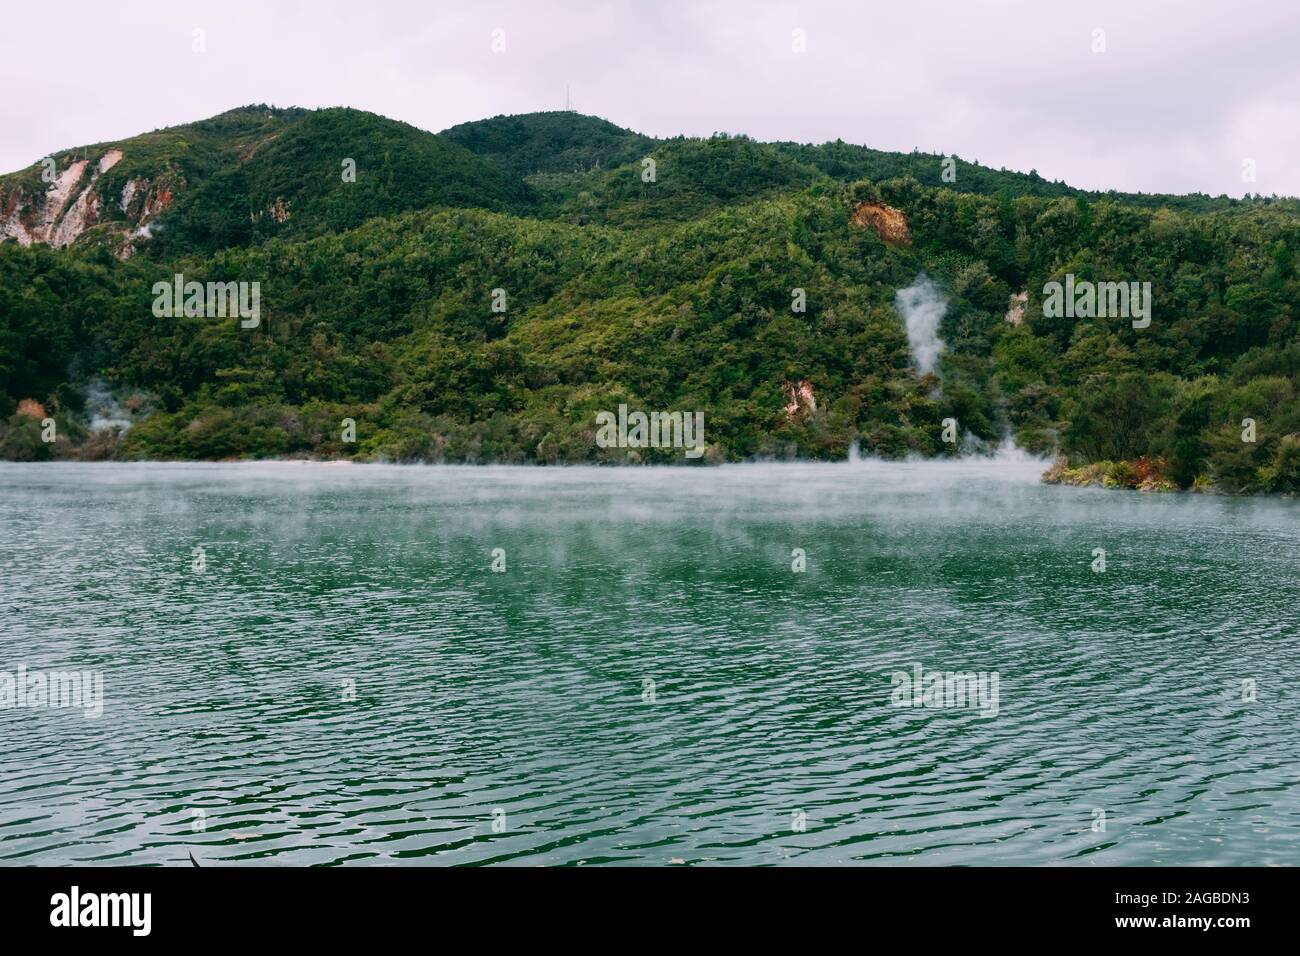 Steam coming out of a beautiful body of water surrounded by green mountains Stock Photo